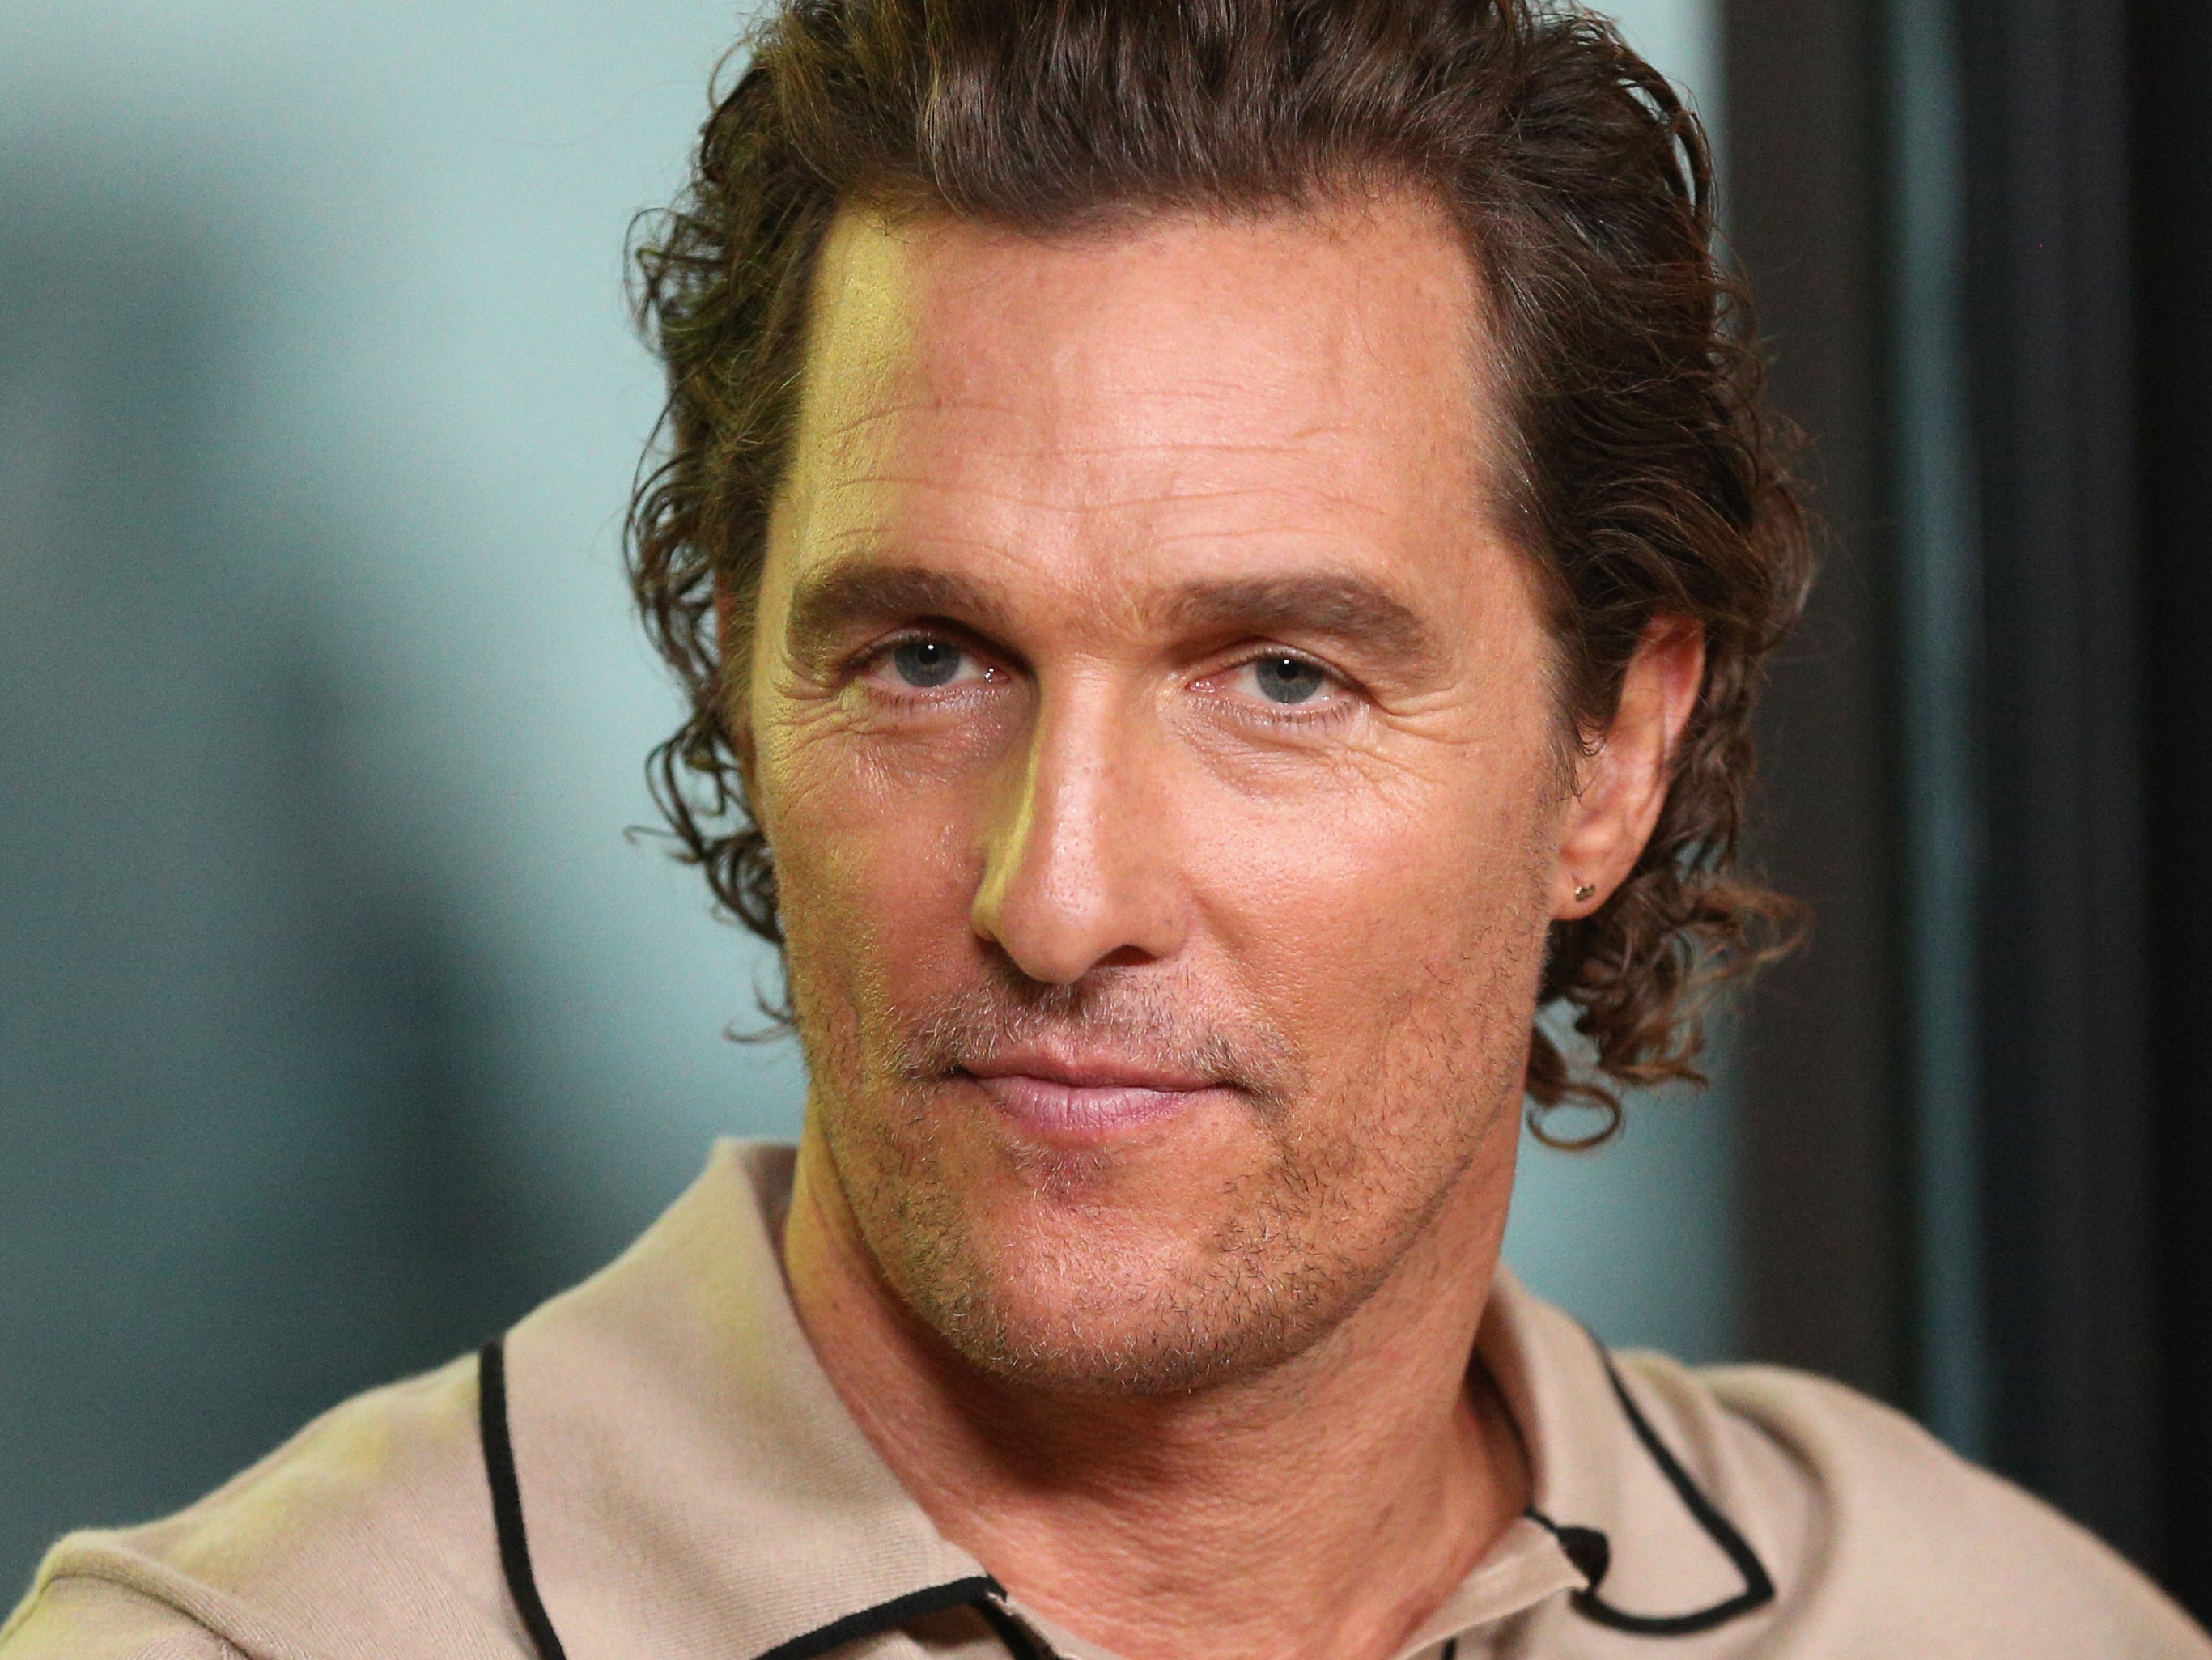 Matthew McConaughey says his father died while having sex | The Independent